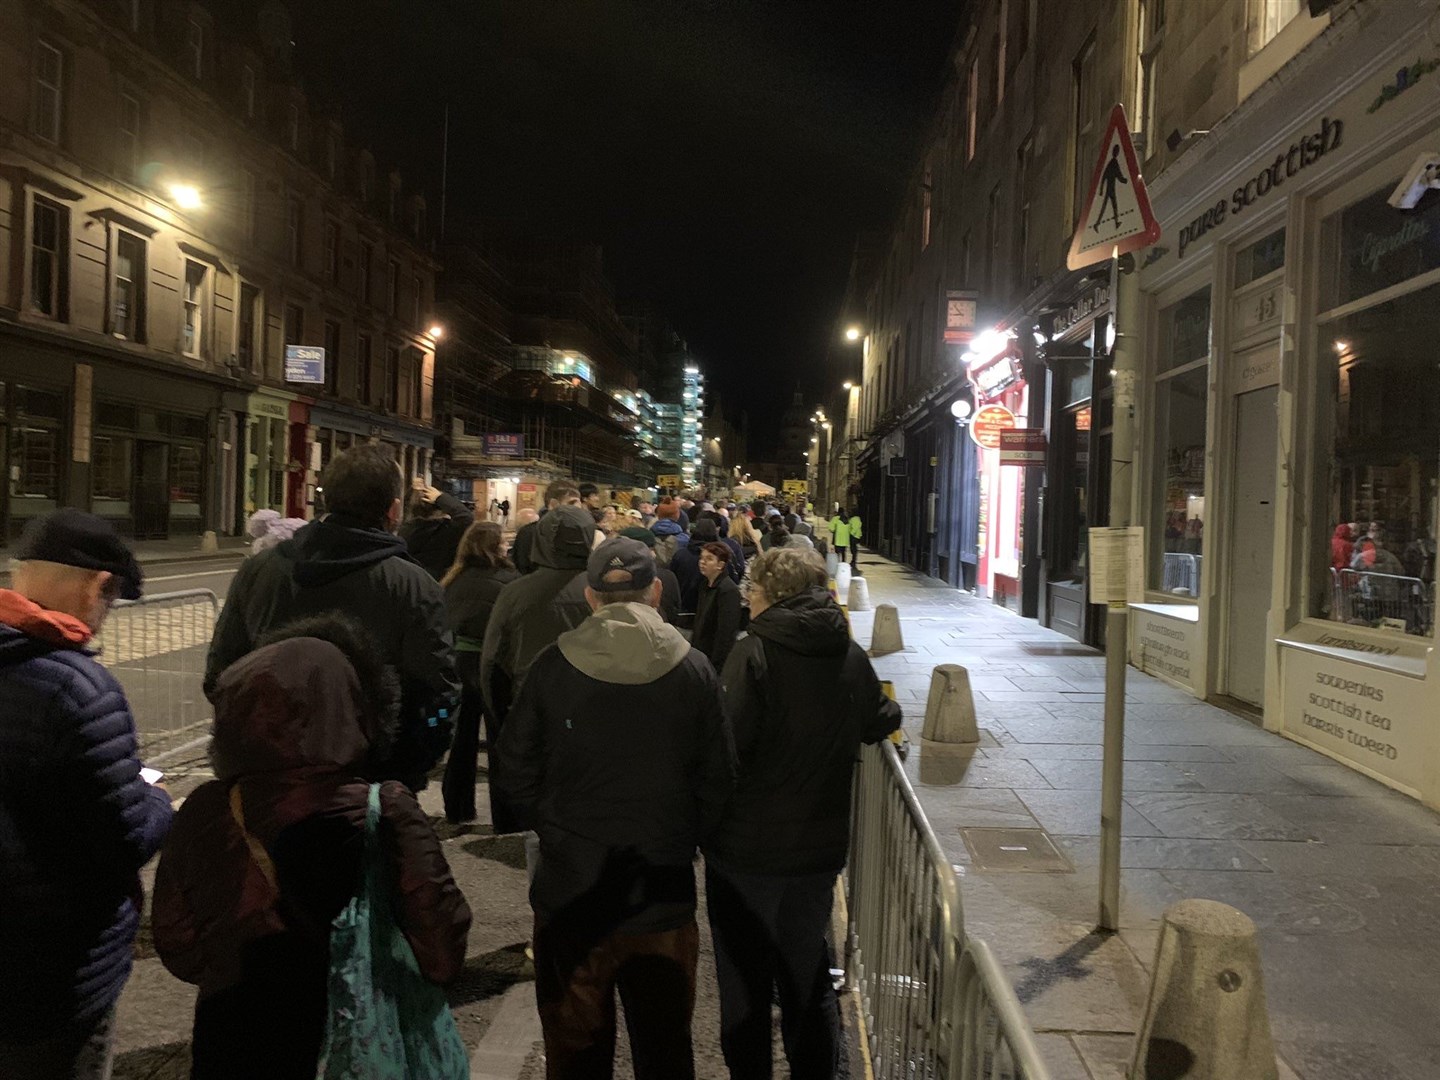 People queued into the early hours of Tuesday morning outside St Giles’ Cathedral to see the Queen’s coffin (Gavin Hamilton/PA)